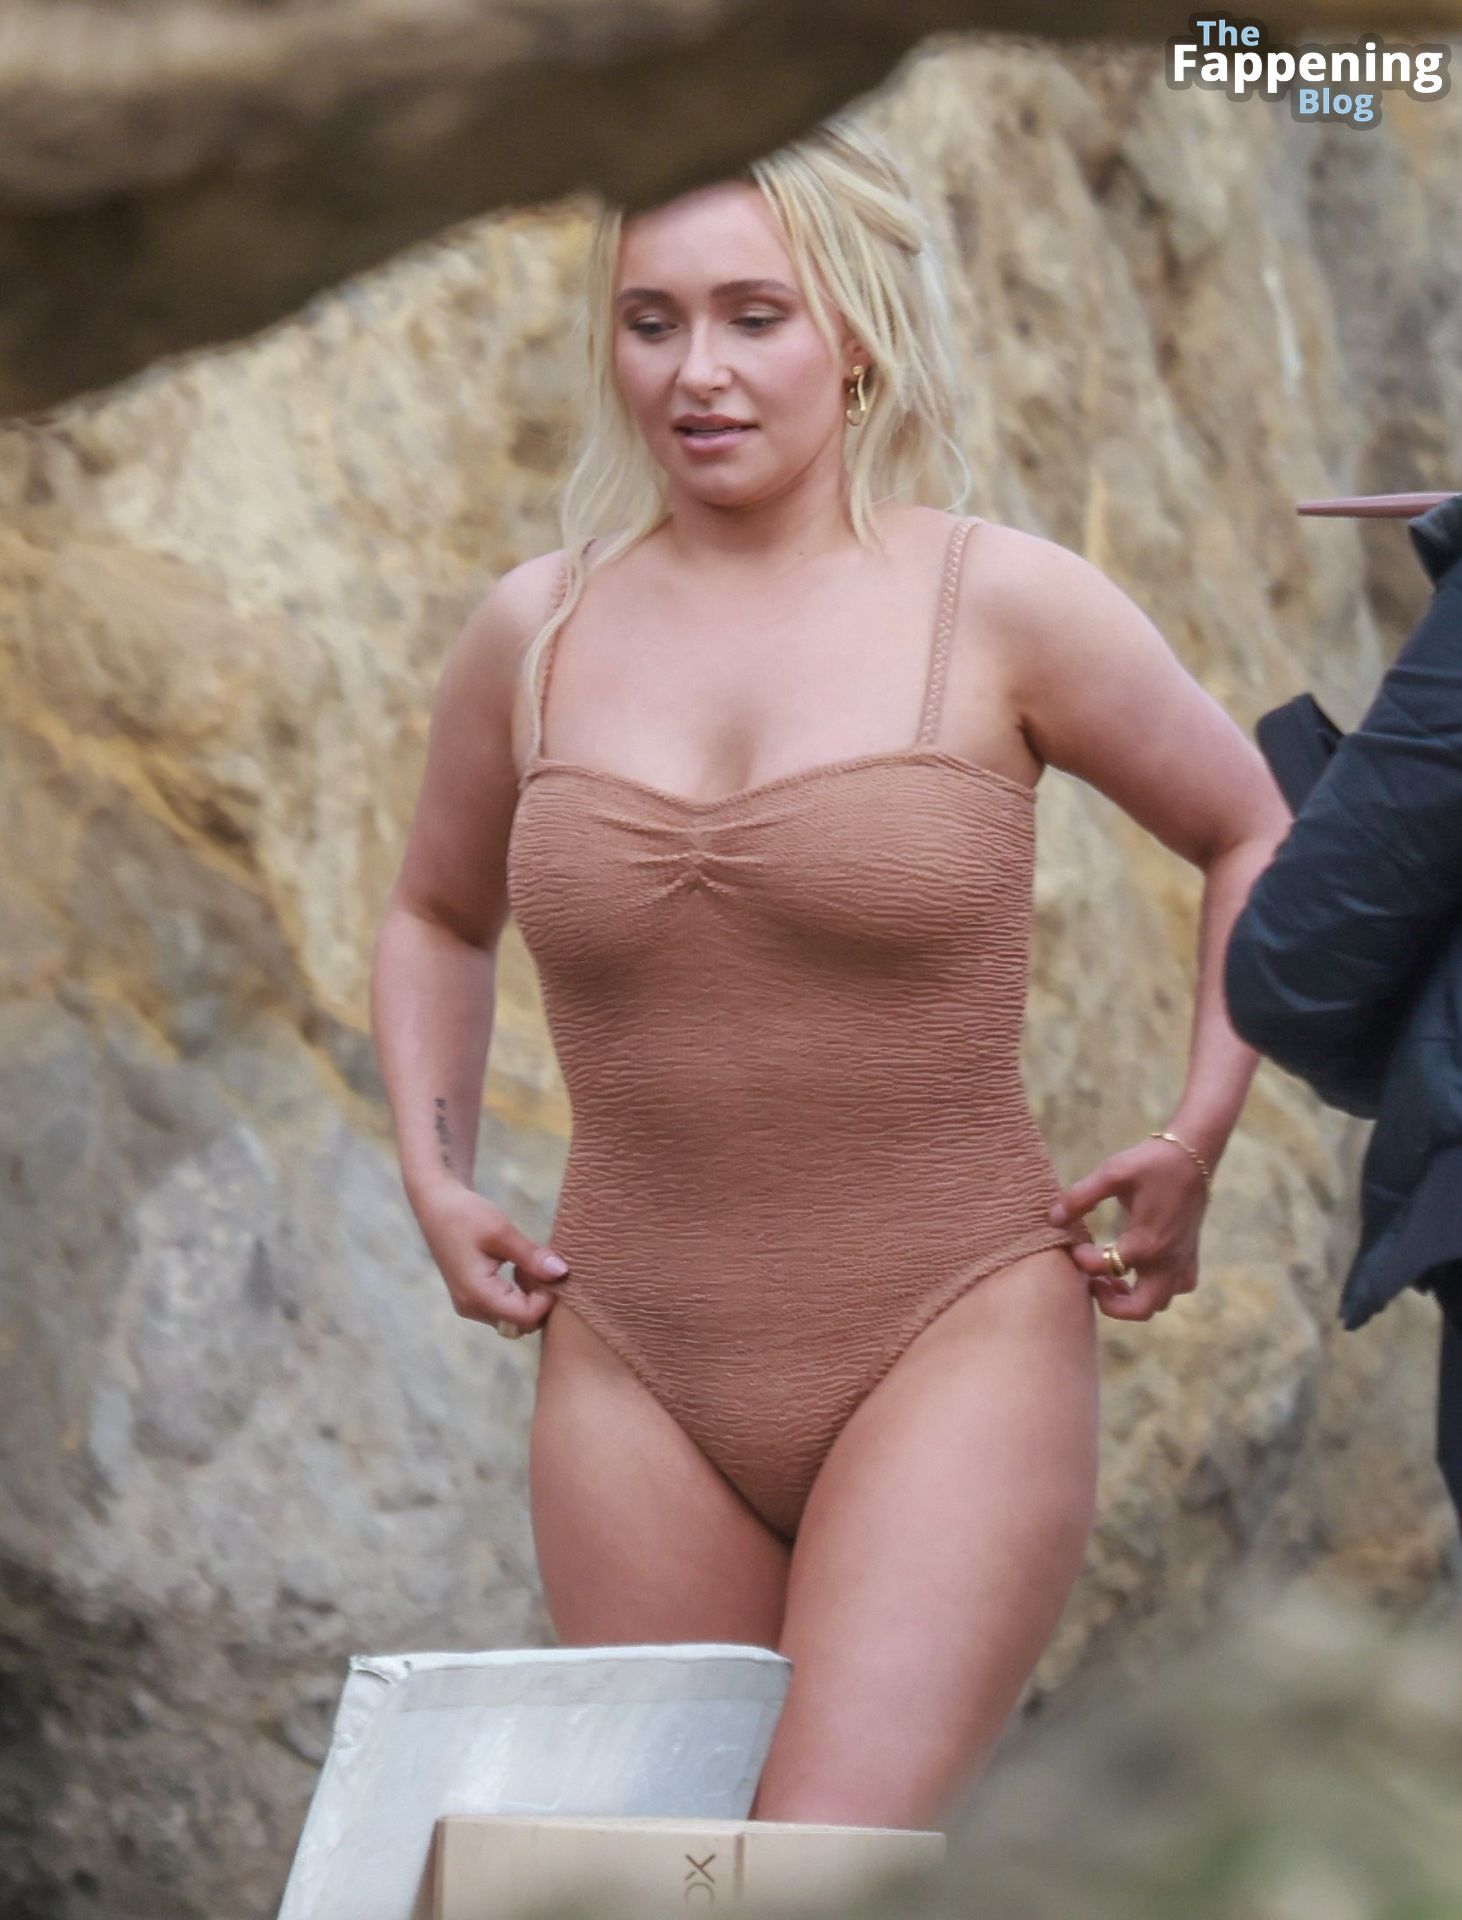 Hayden-Panettiere-Sexy-The-Fappening-Blog-73.jpg